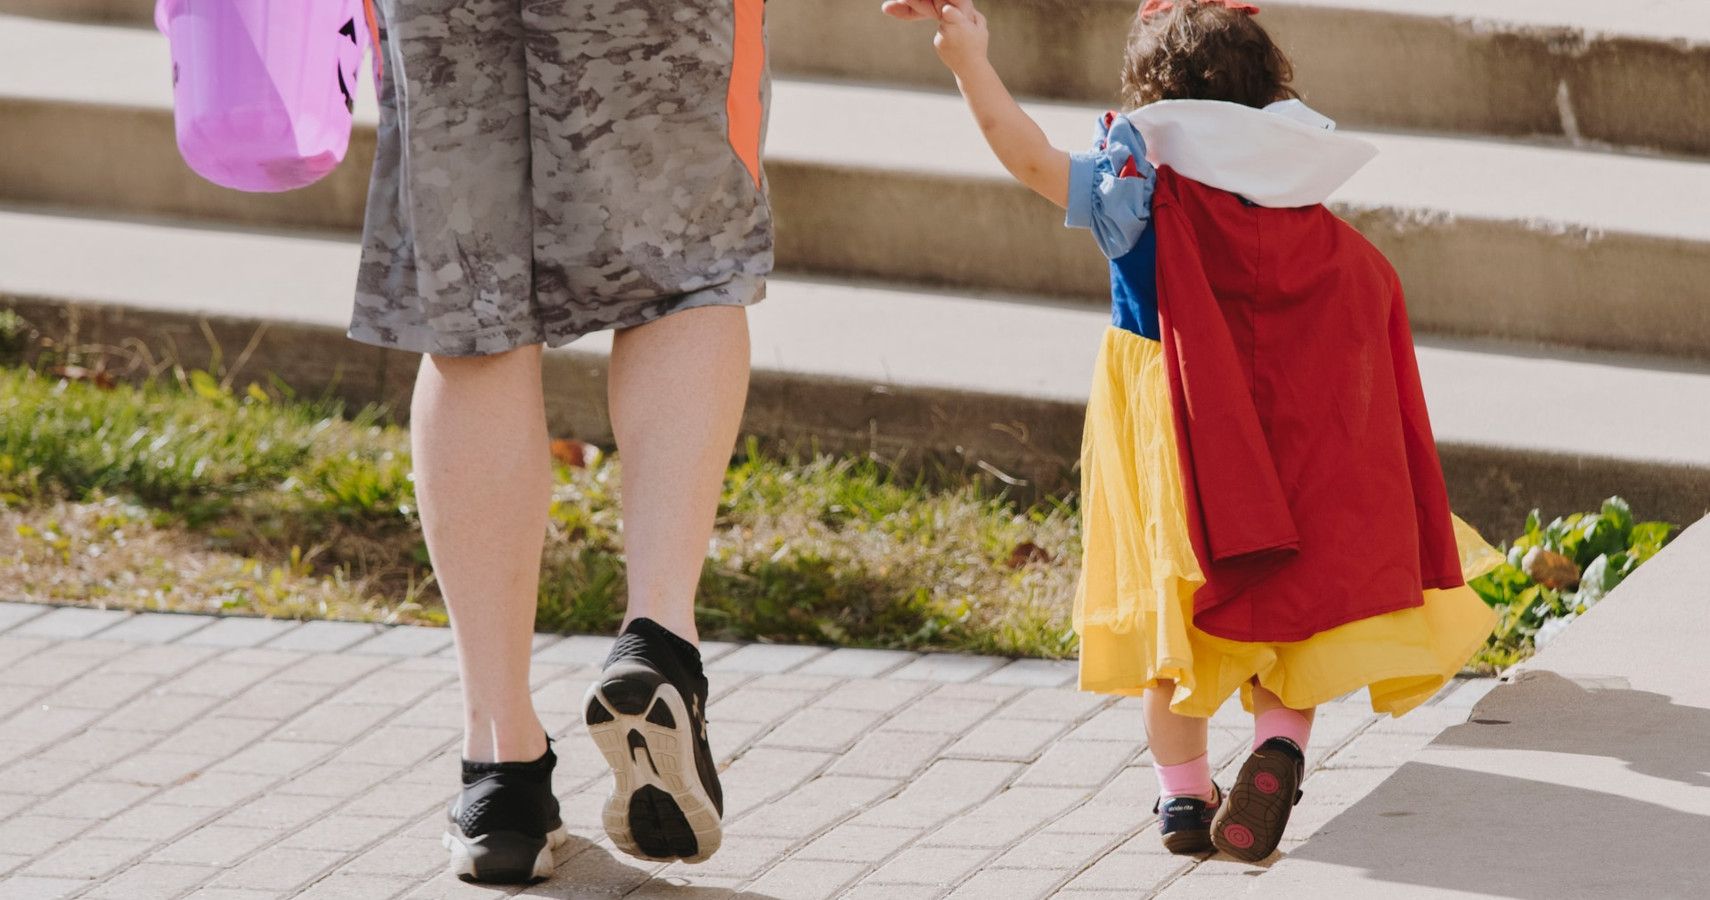 A young girl dressed as Snow White